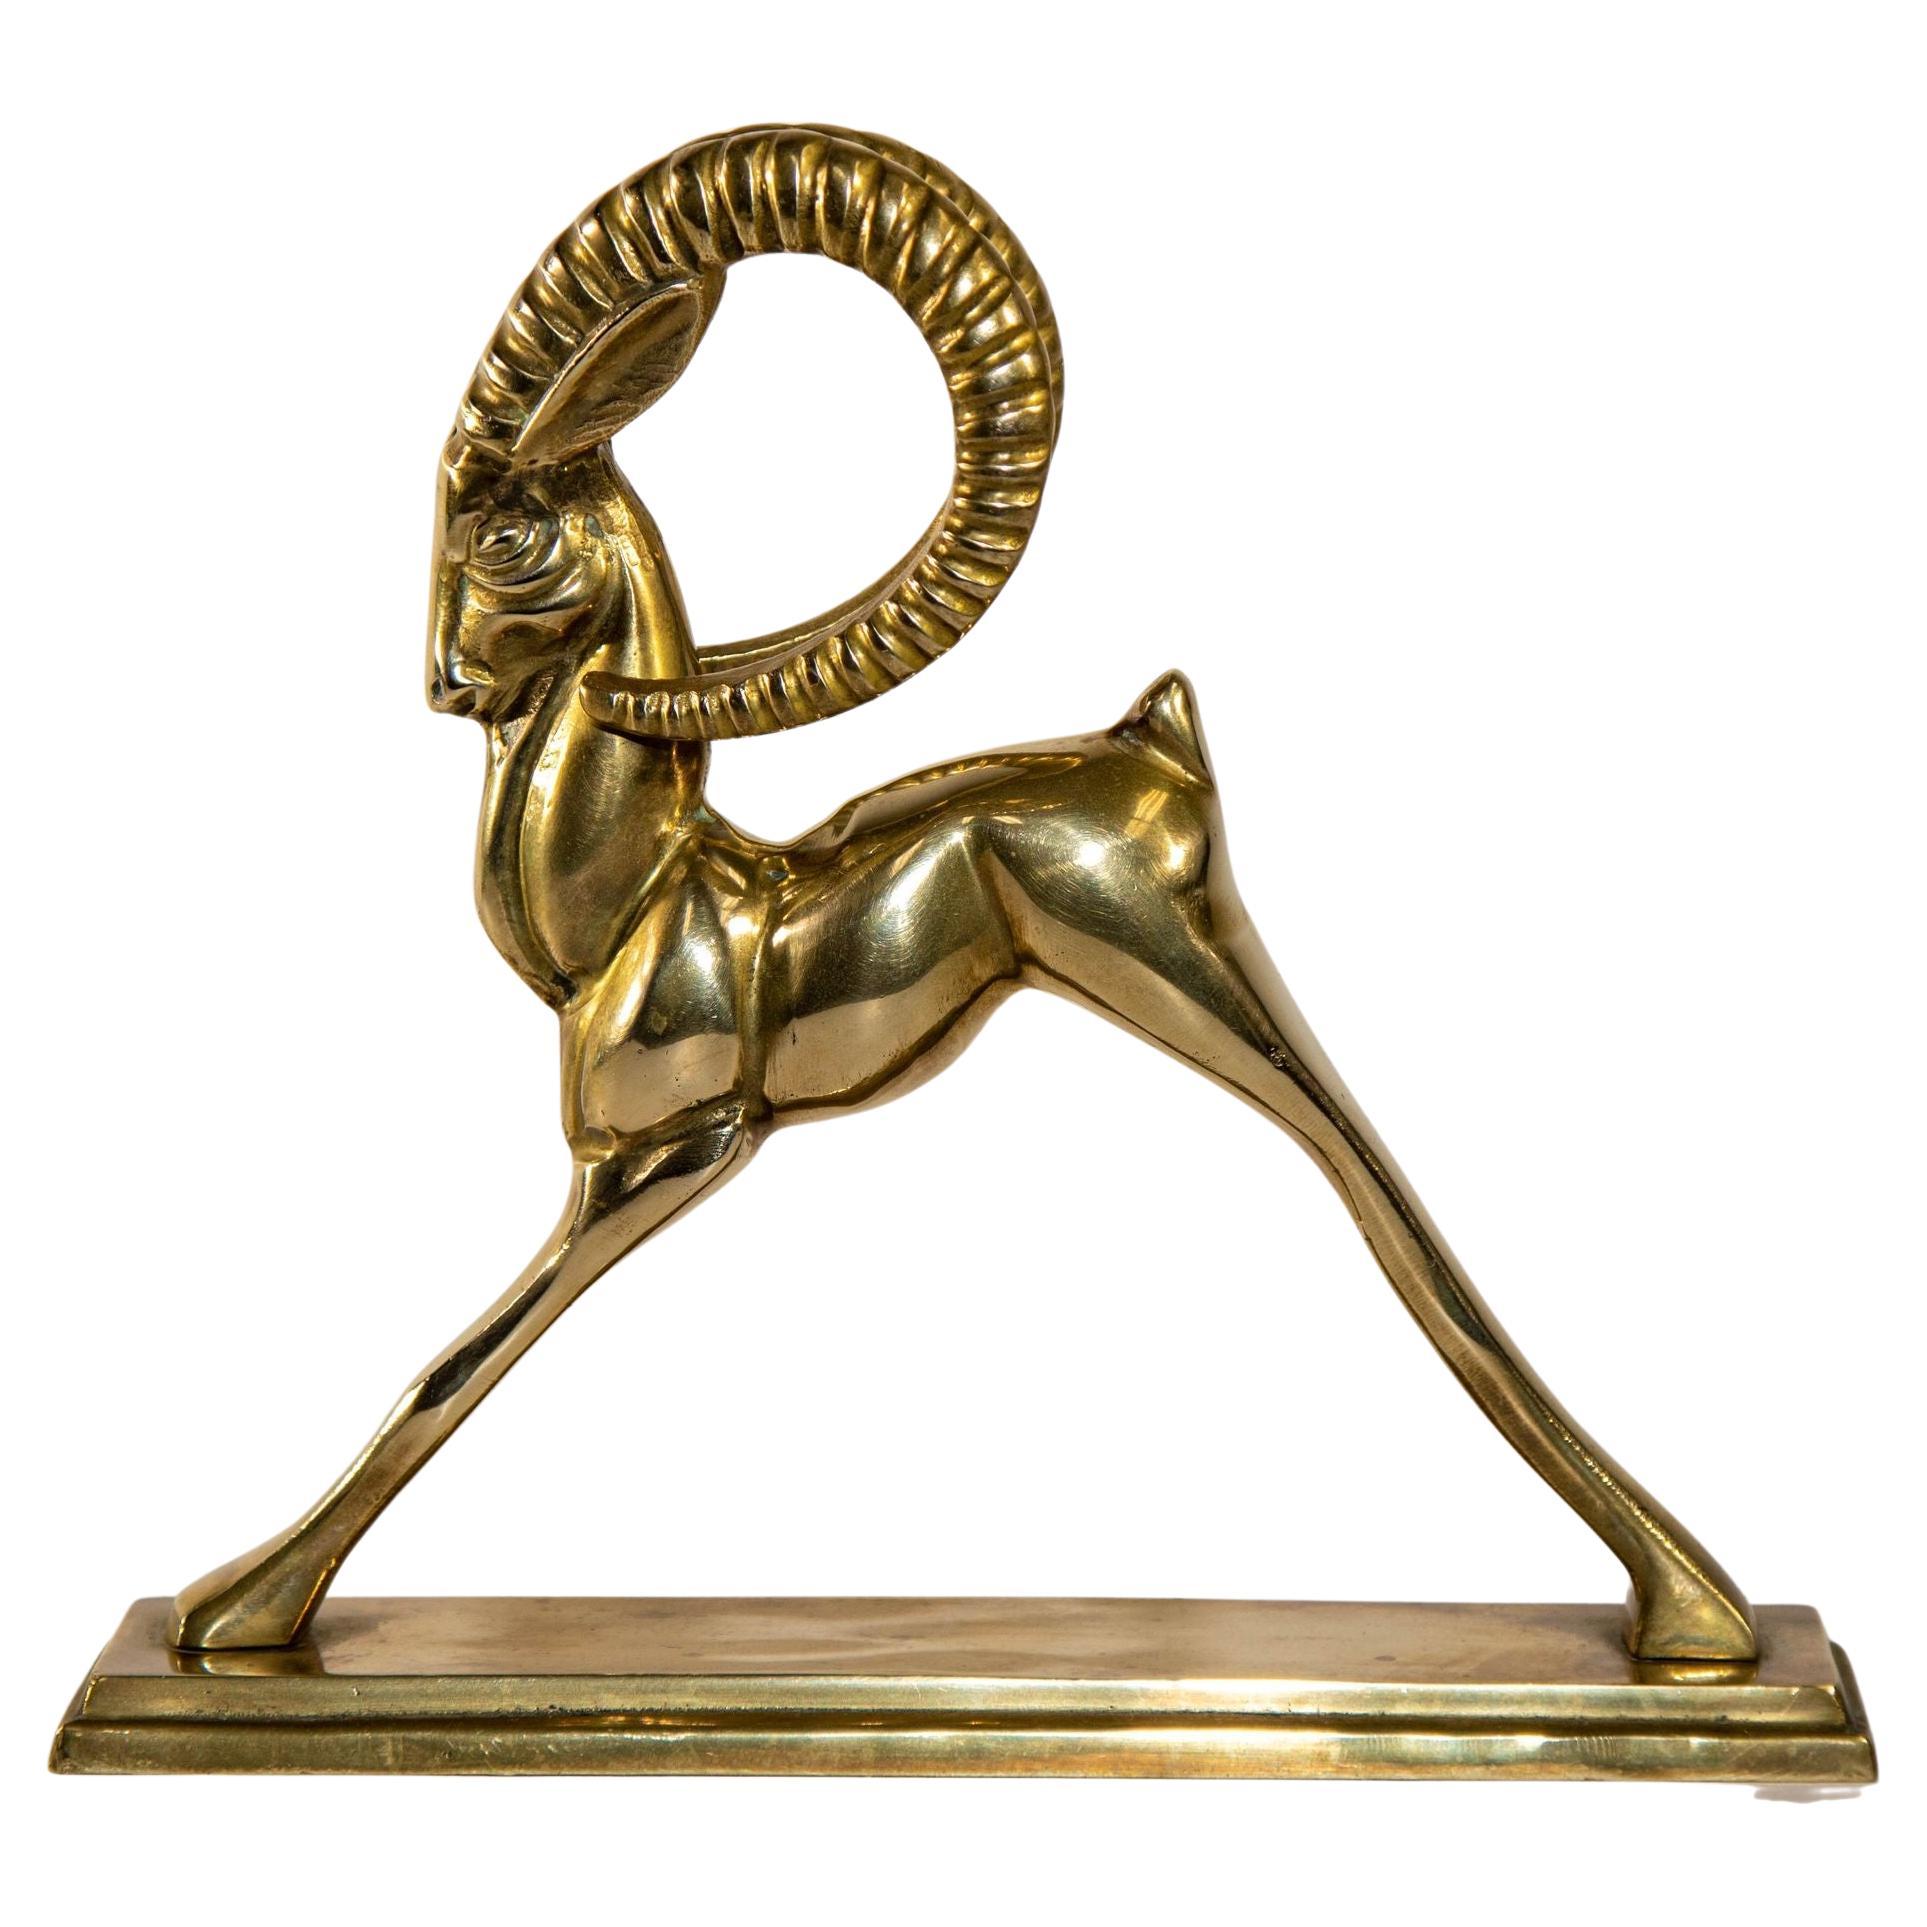 Vintage French Art Deco Style Sculpture of Brass Ibex Antelope For Sale